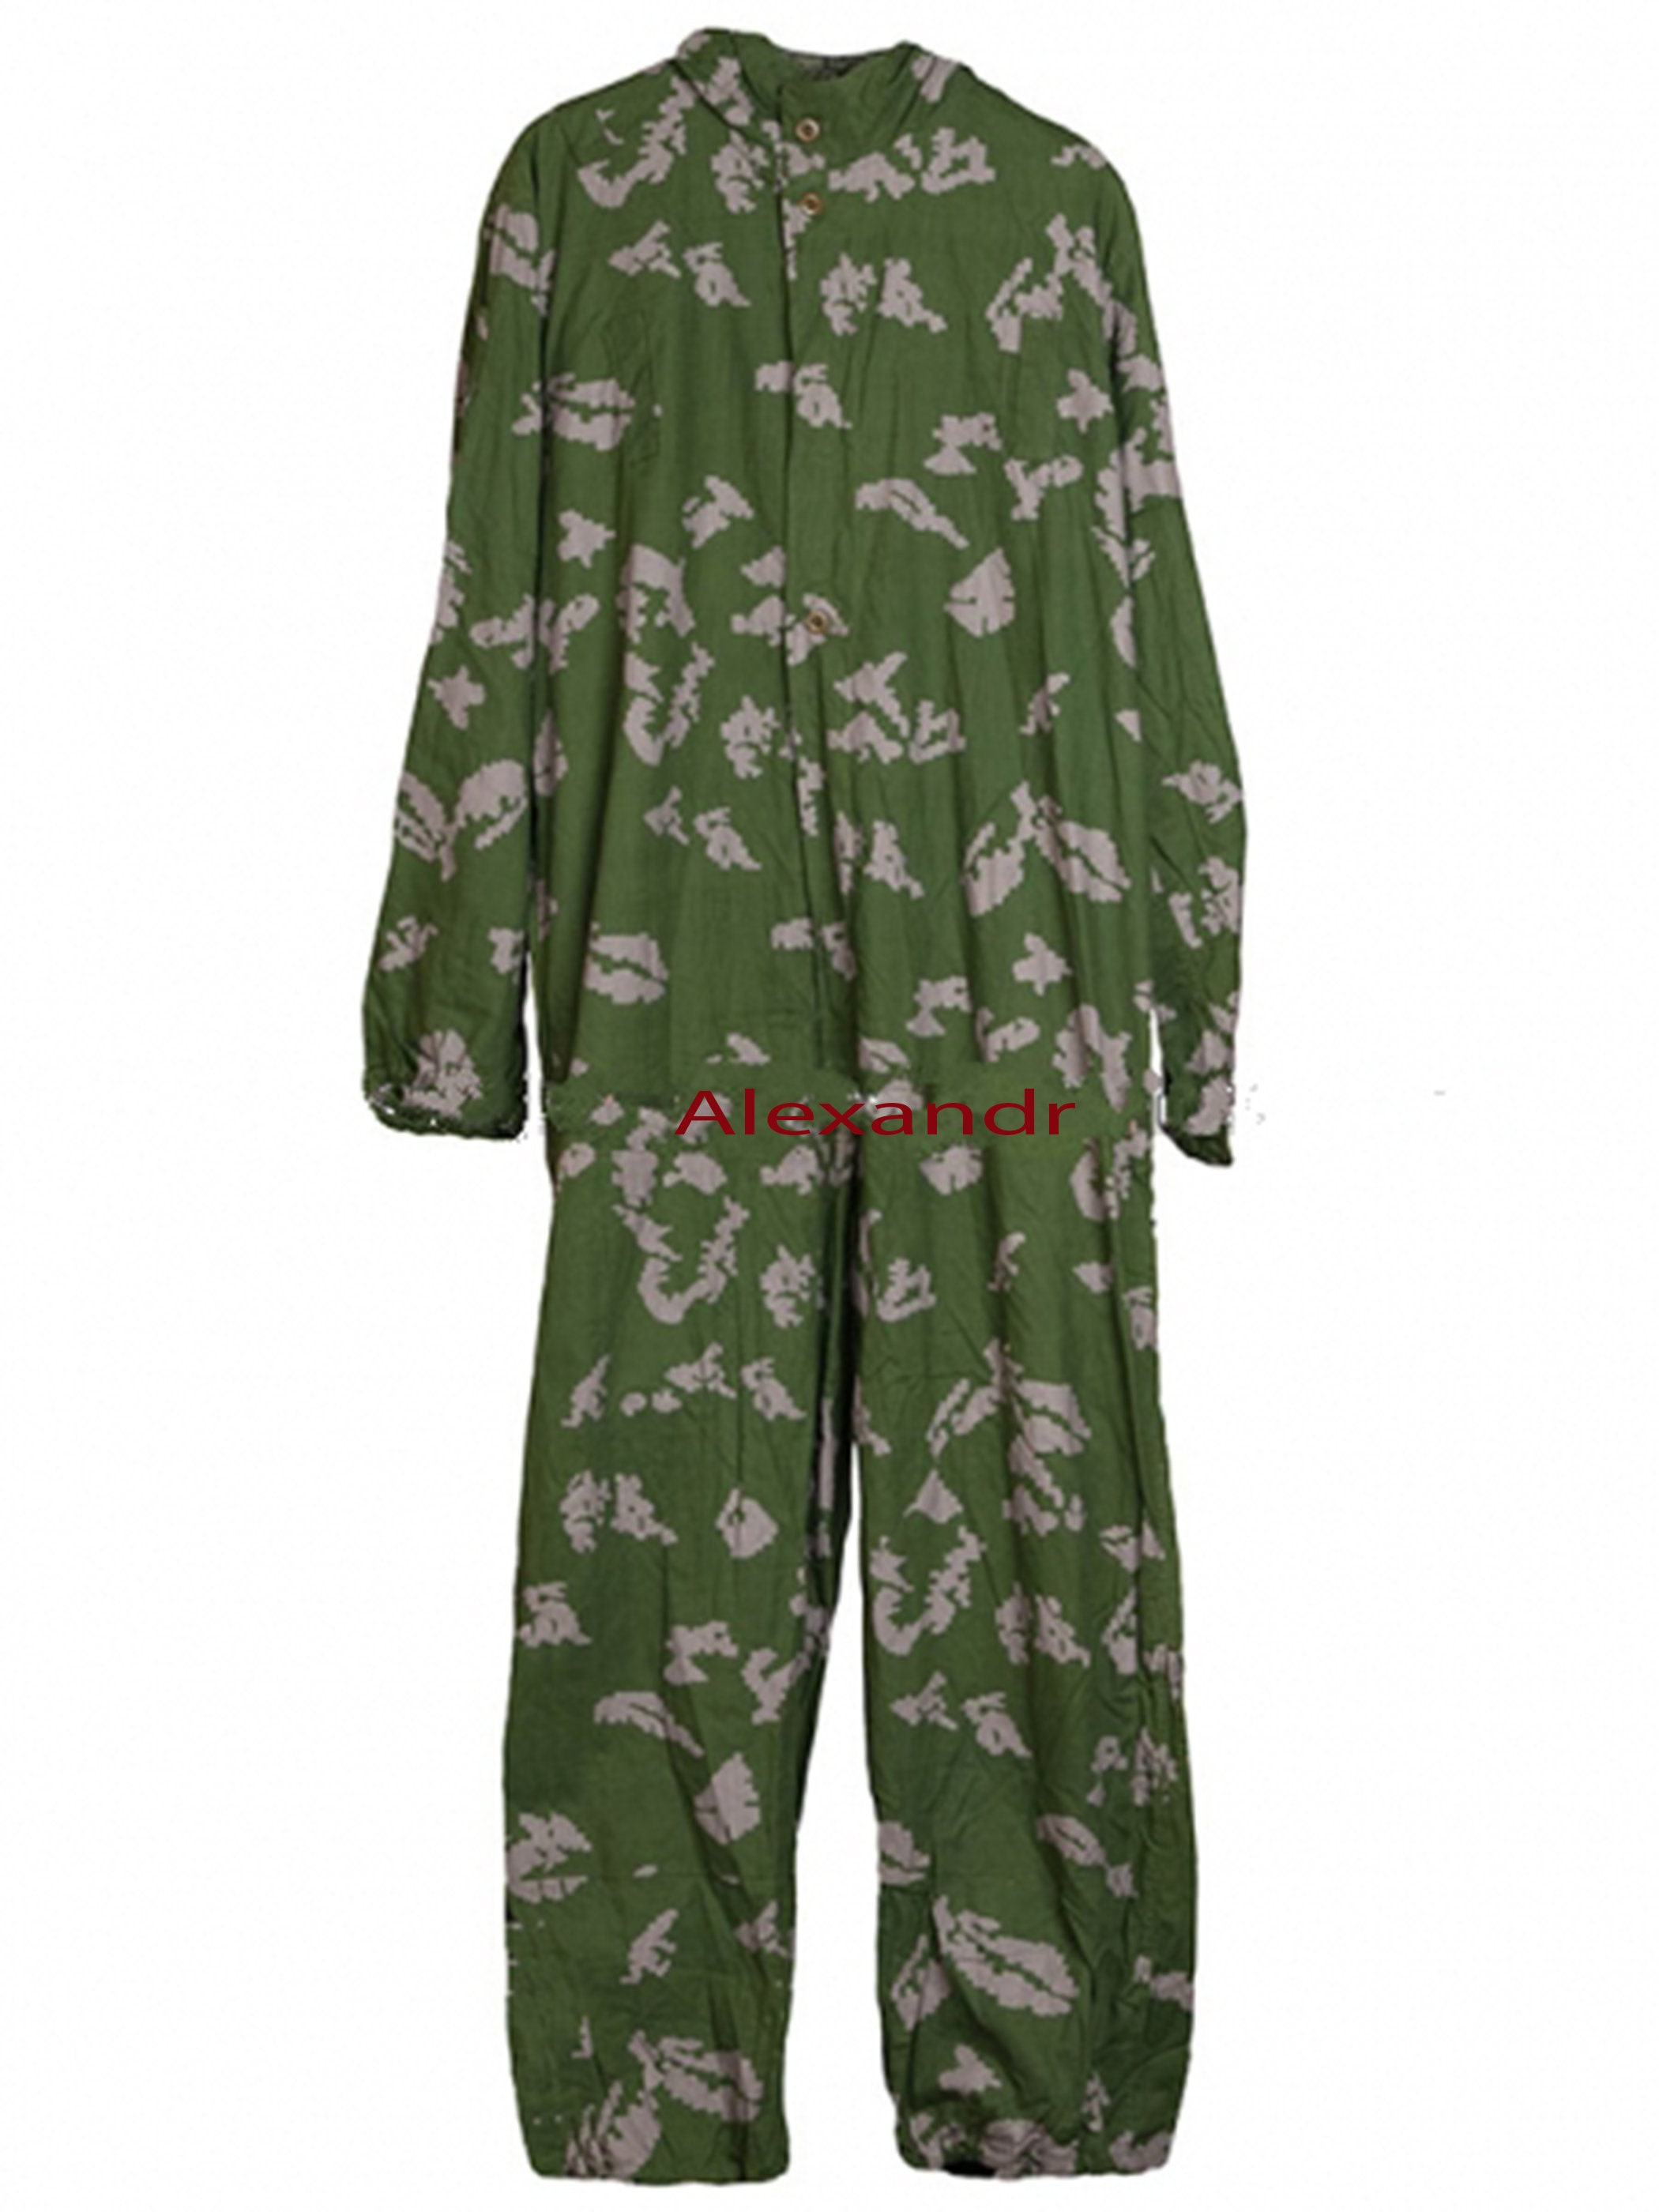 SOVIET Russian Army USSR BEREZKA VDV Musk Camouflage OVERALLS Suit ...